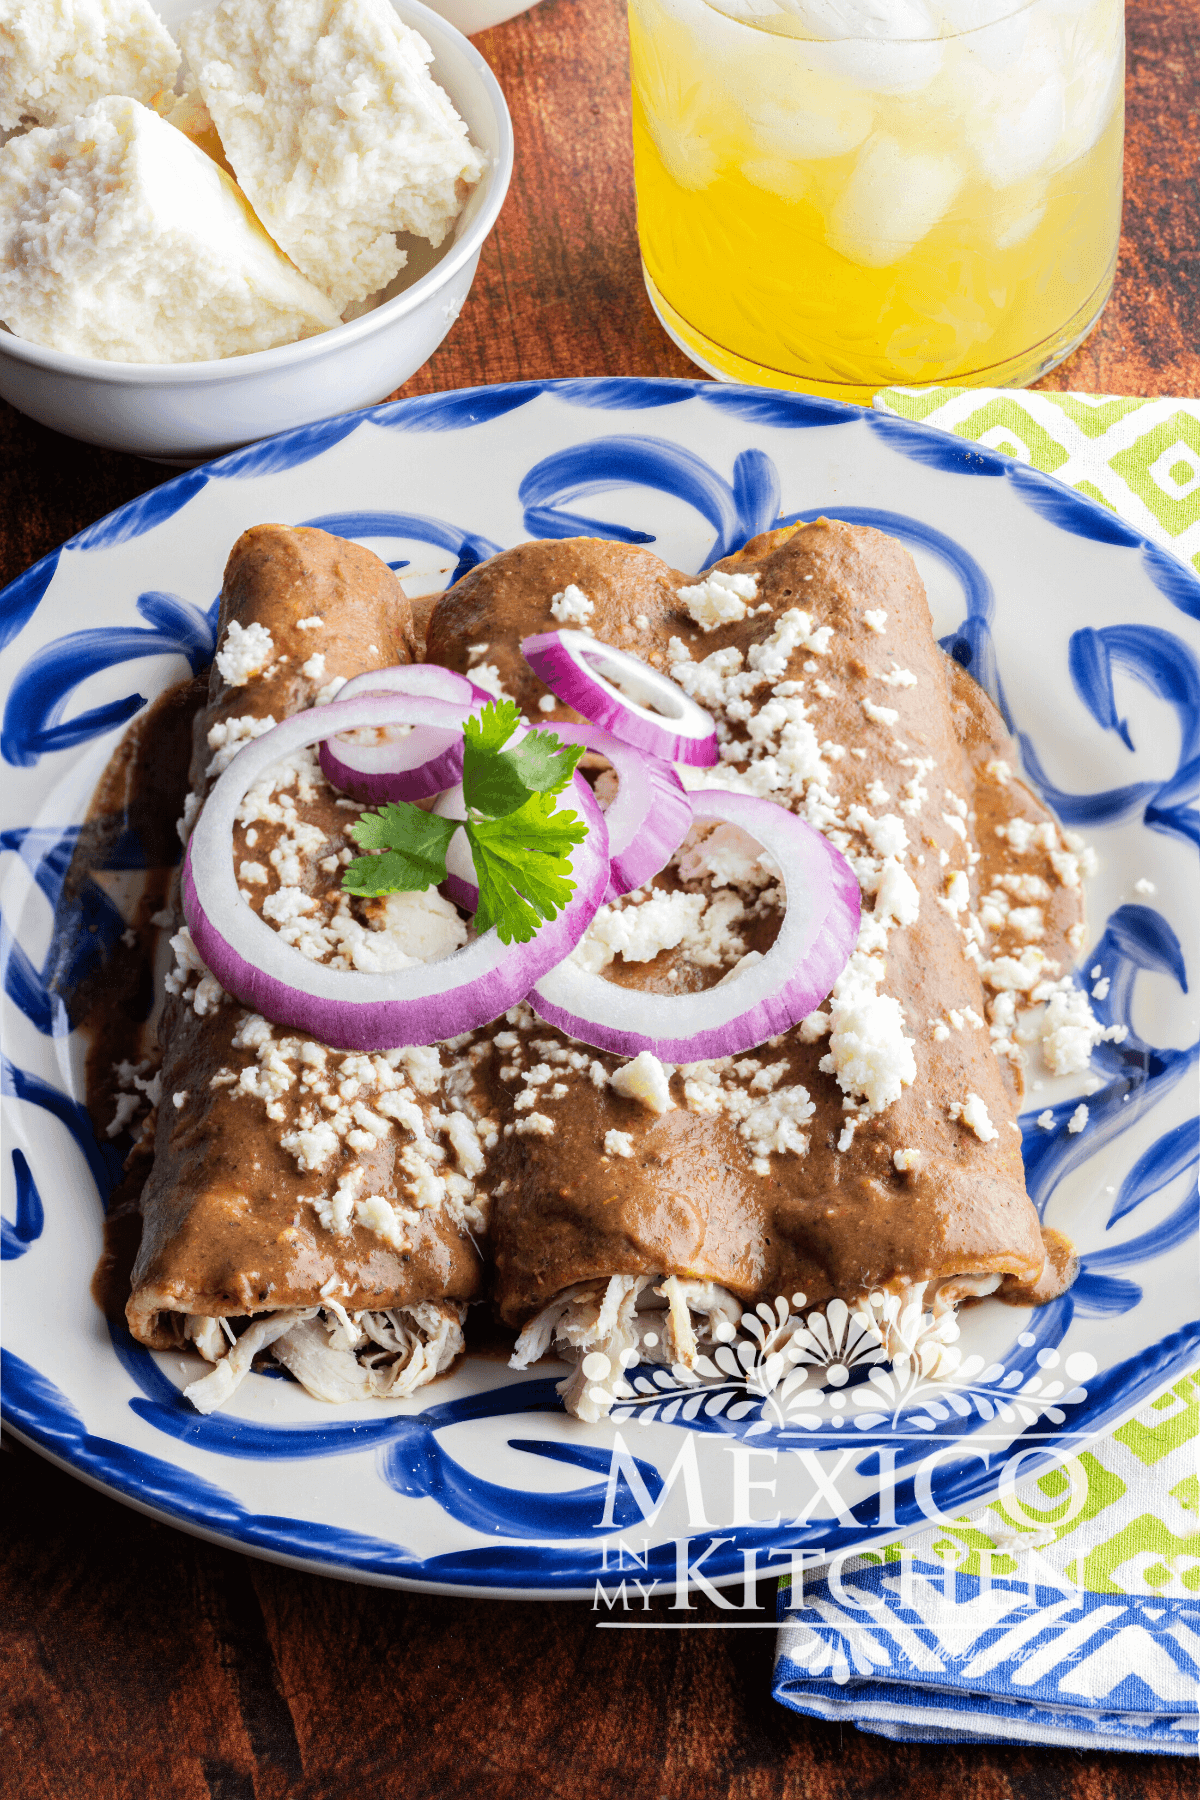 Enfrijoladas served in a plate topped with queso fresco and slices of purple onion.